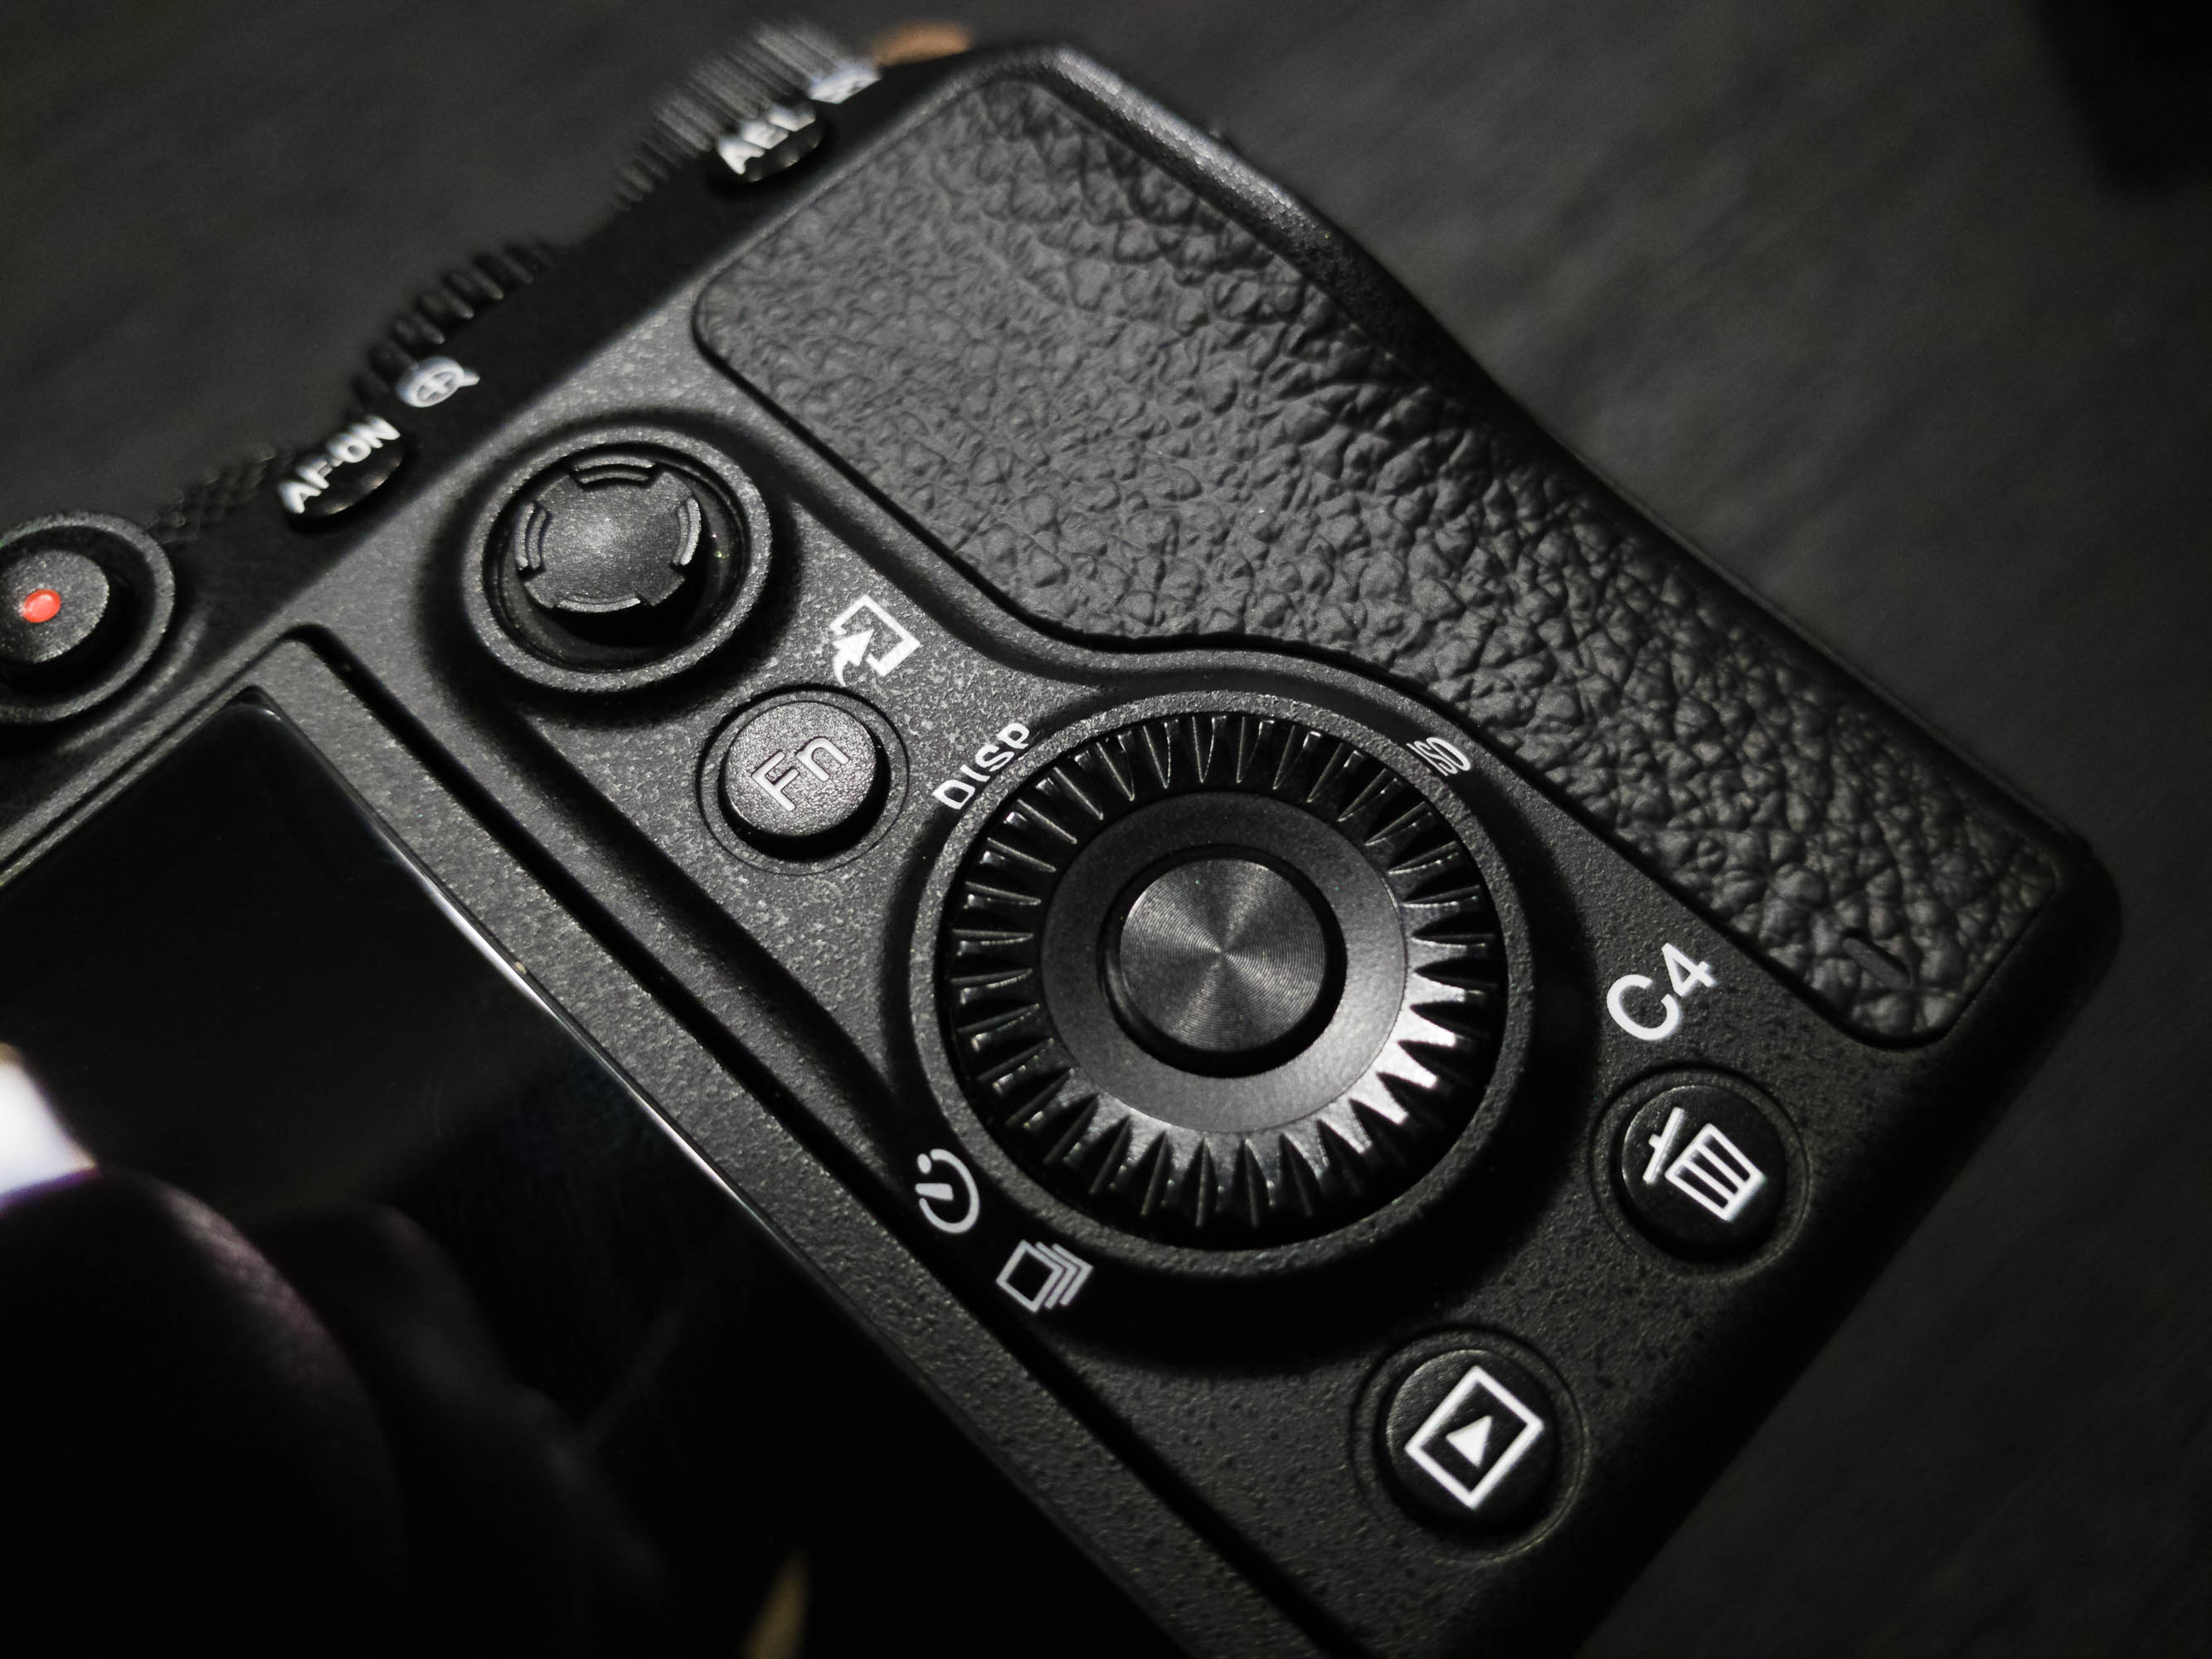 Sony a7III rear buttons and joystick